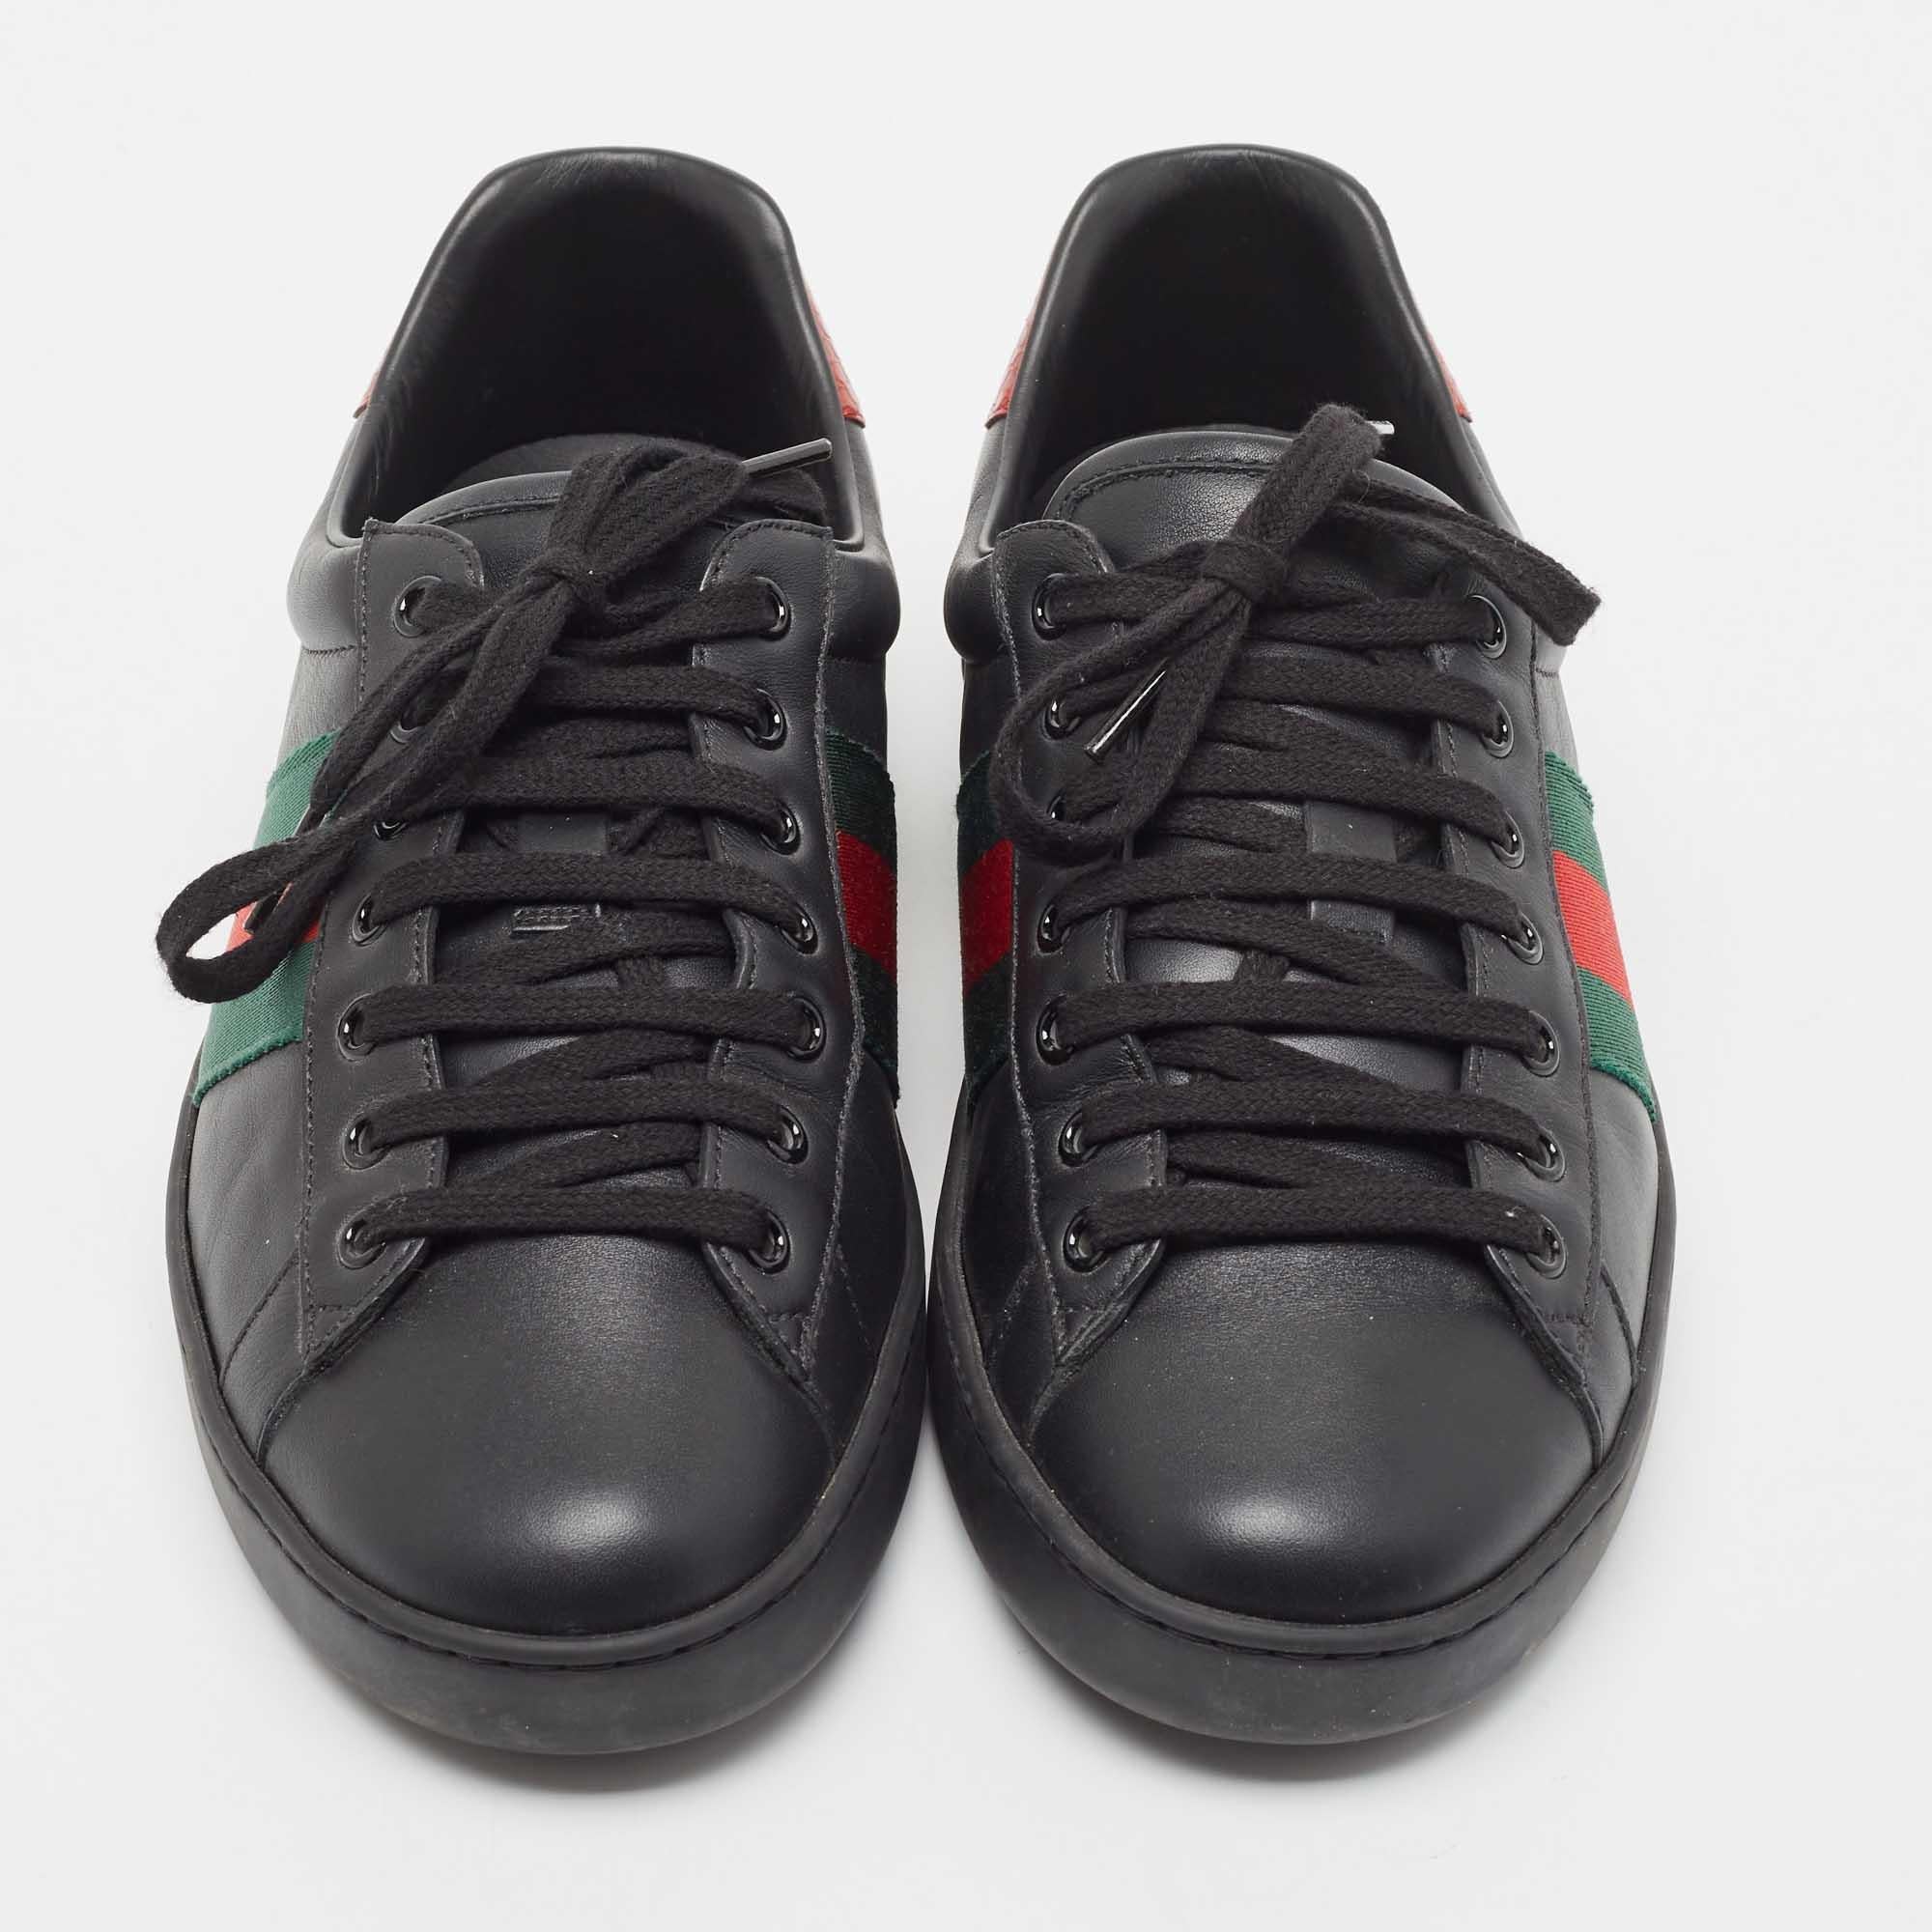 Coming in a classic silhouette, these Gucci black Ace sneakers are a seamless combination of luxury, comfort, and style. These sneakers are finished with signature details and comfortable insoles.

Includes: Original Box, Info Booklet

